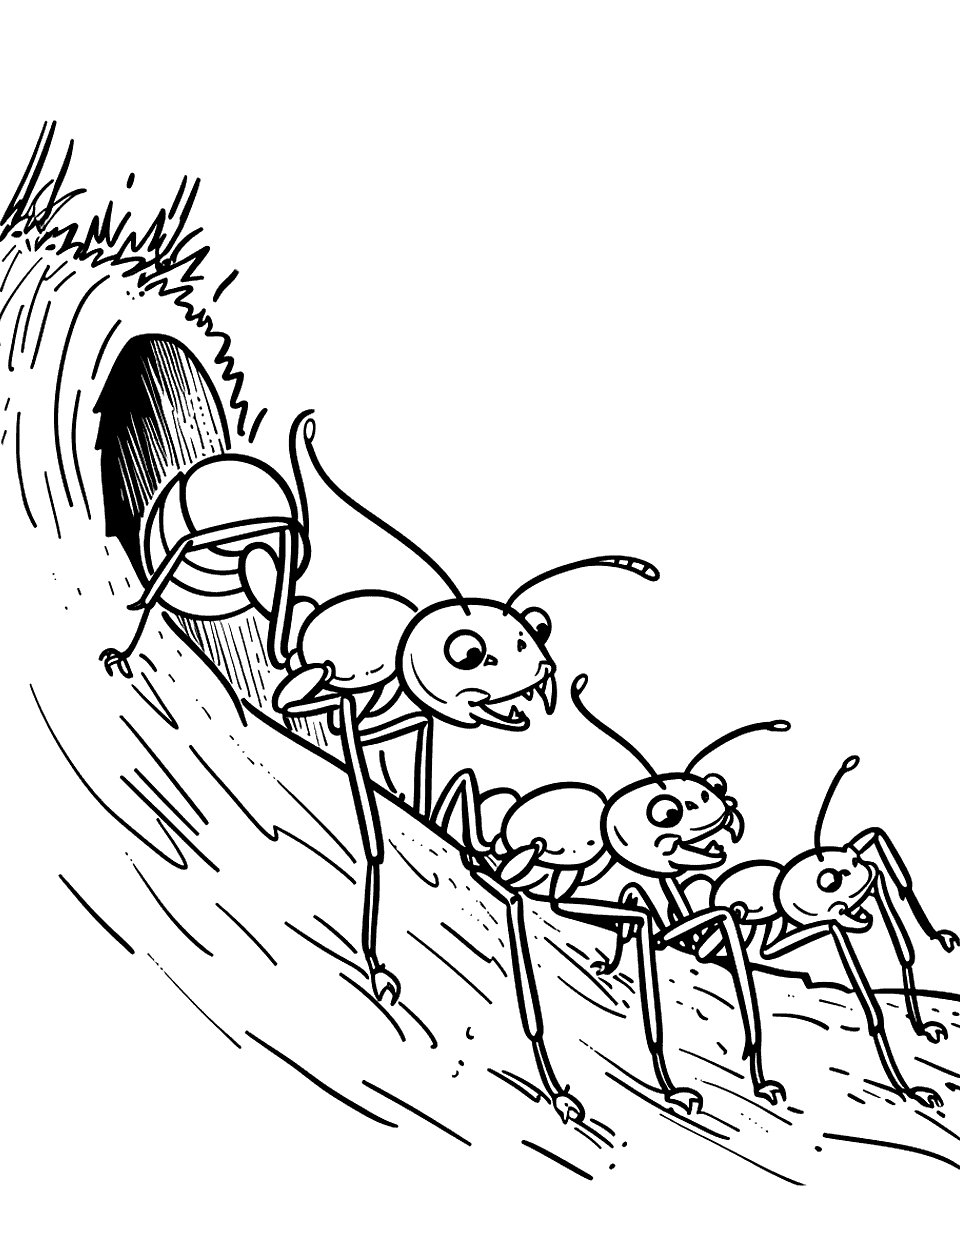 Ants Building a Tunnel Insect Coloring Page - A line of ants working together to dig a tunnel into their ant hill.